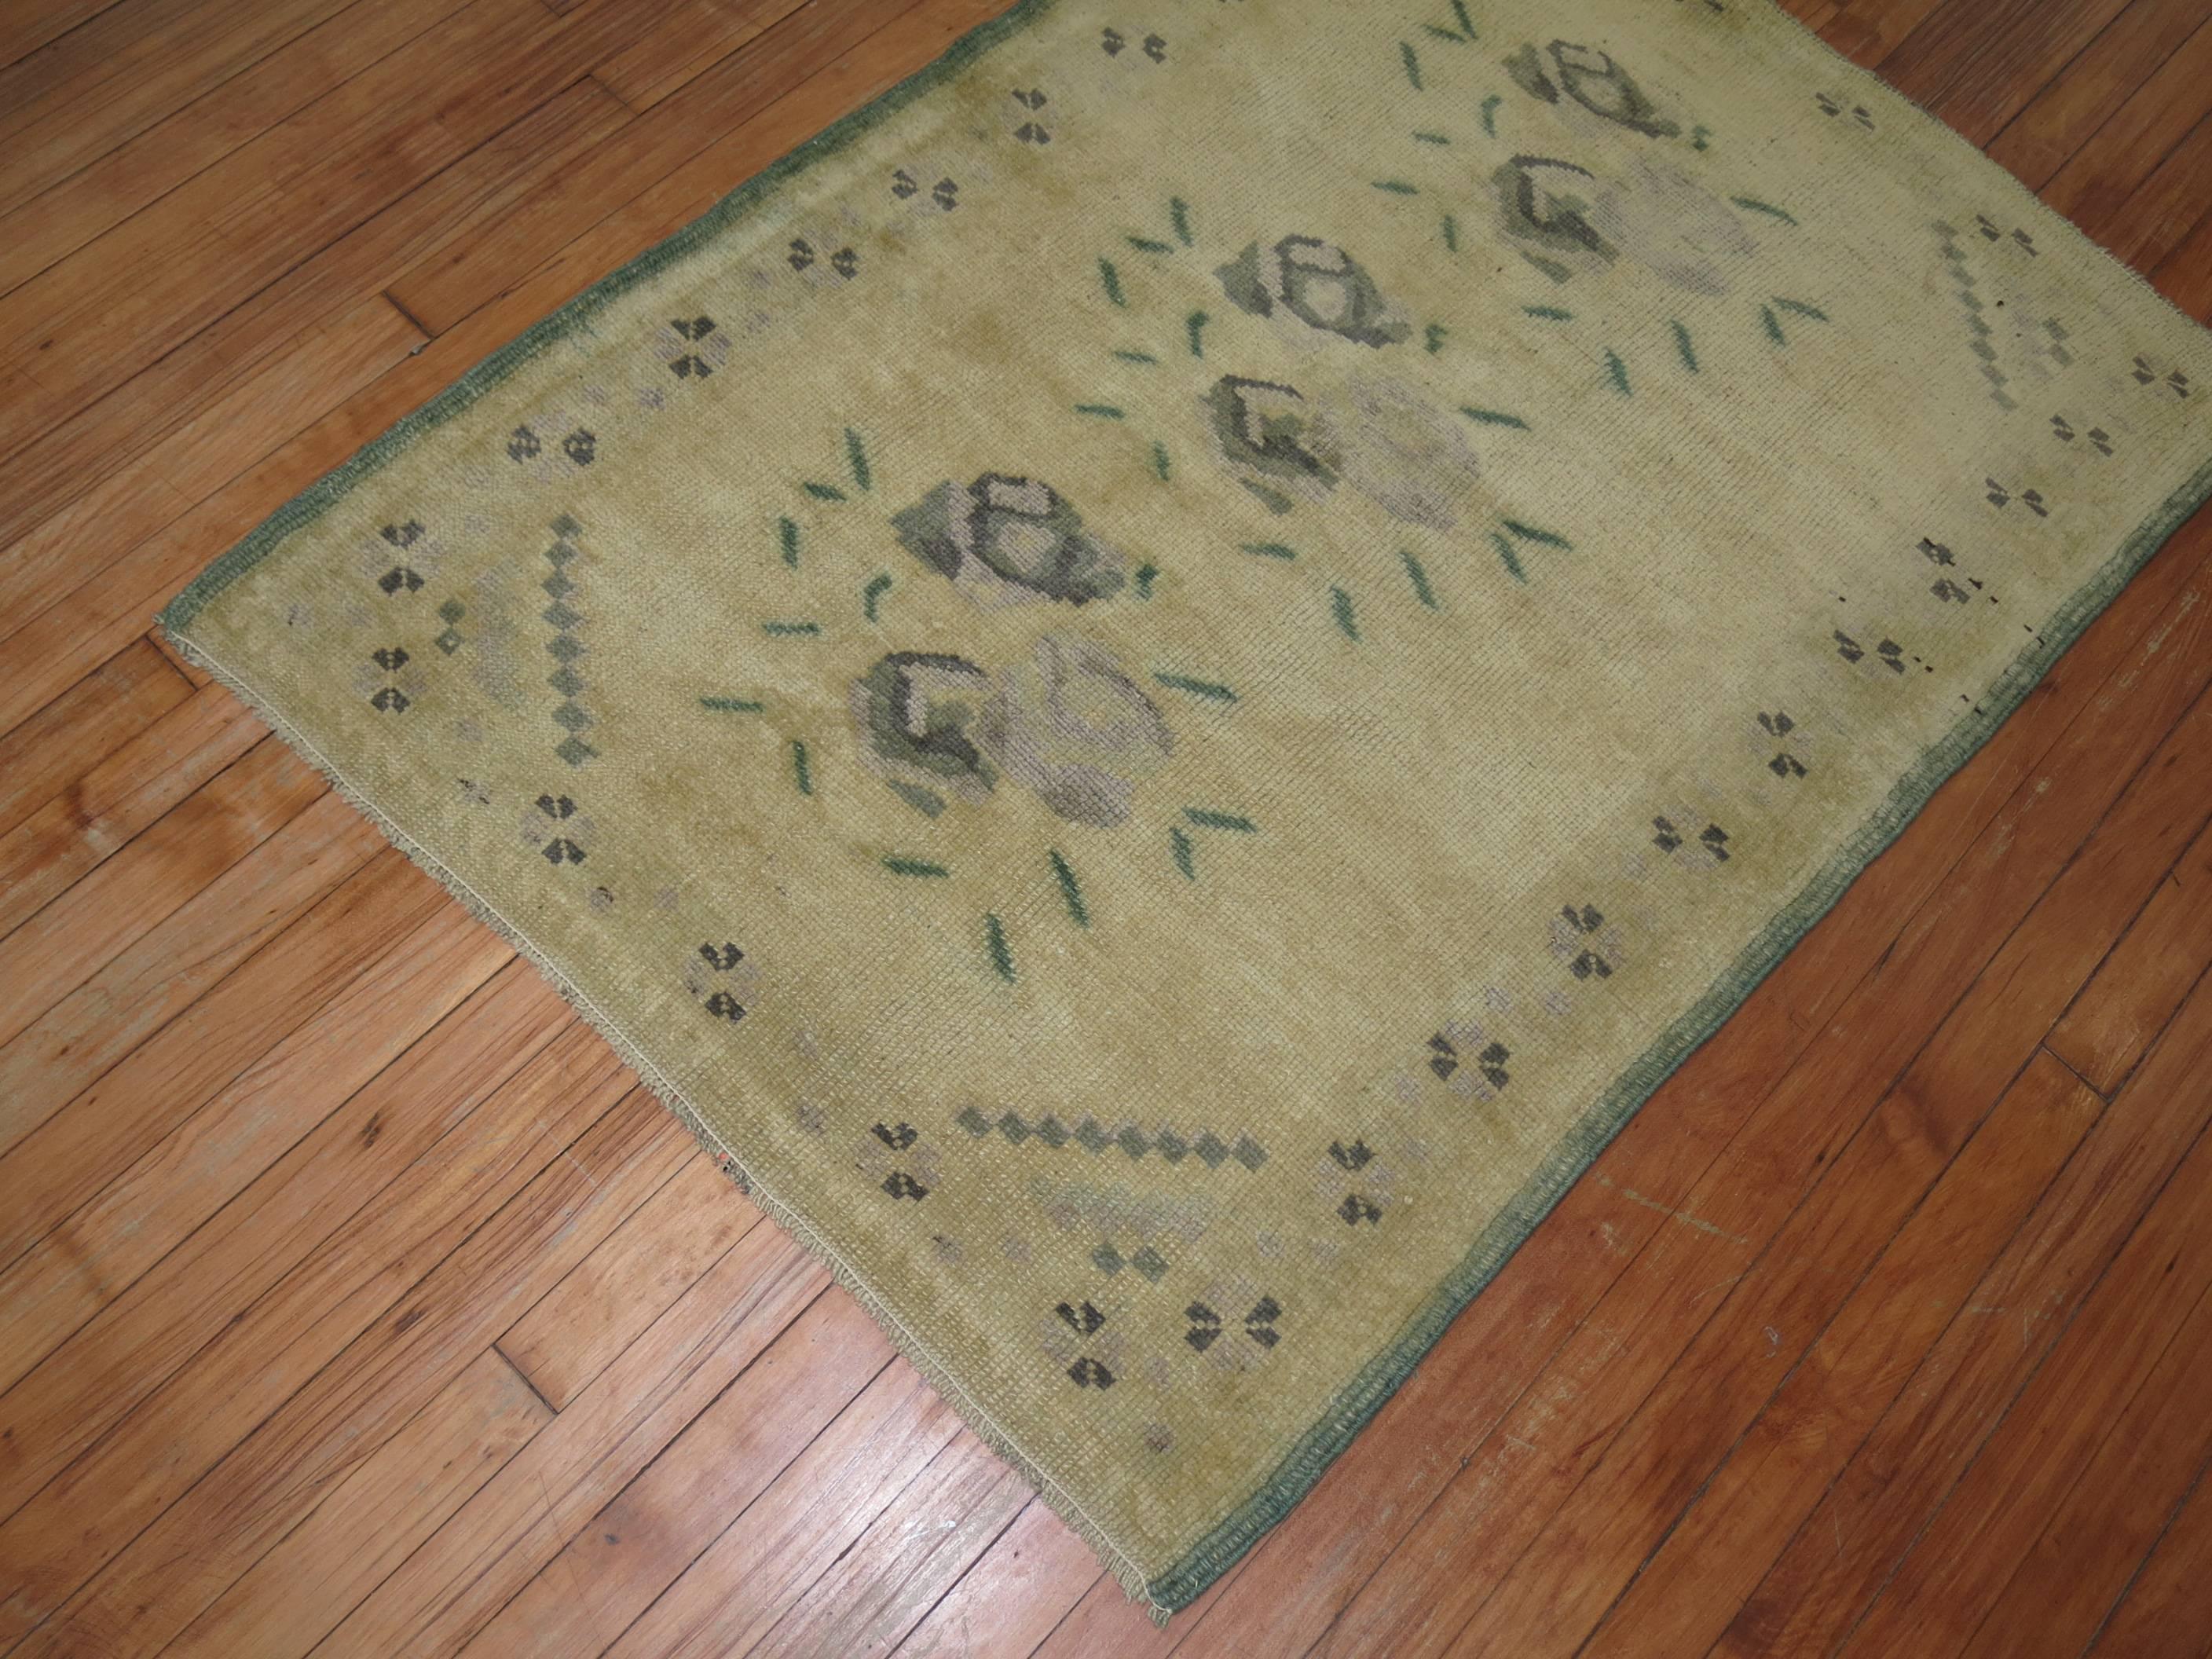 A Mid-Century Turkish rug with an intricate floral motif on a beige ground.